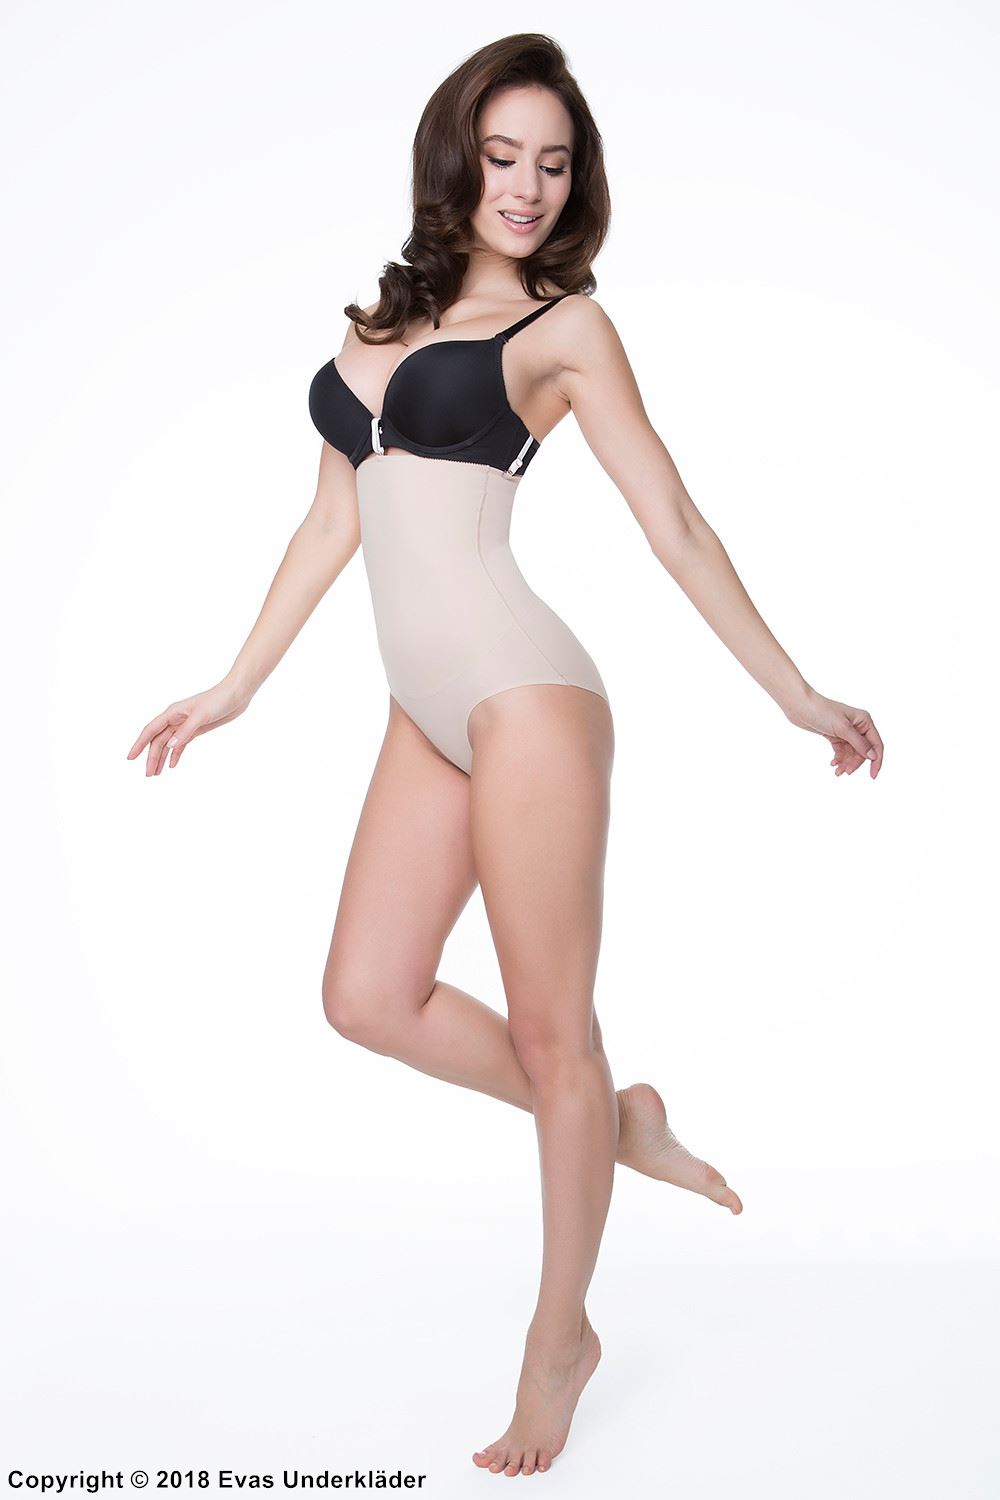 Shapewear maxi briefs, belly, waist and buttocks control, anti-slip silicone band